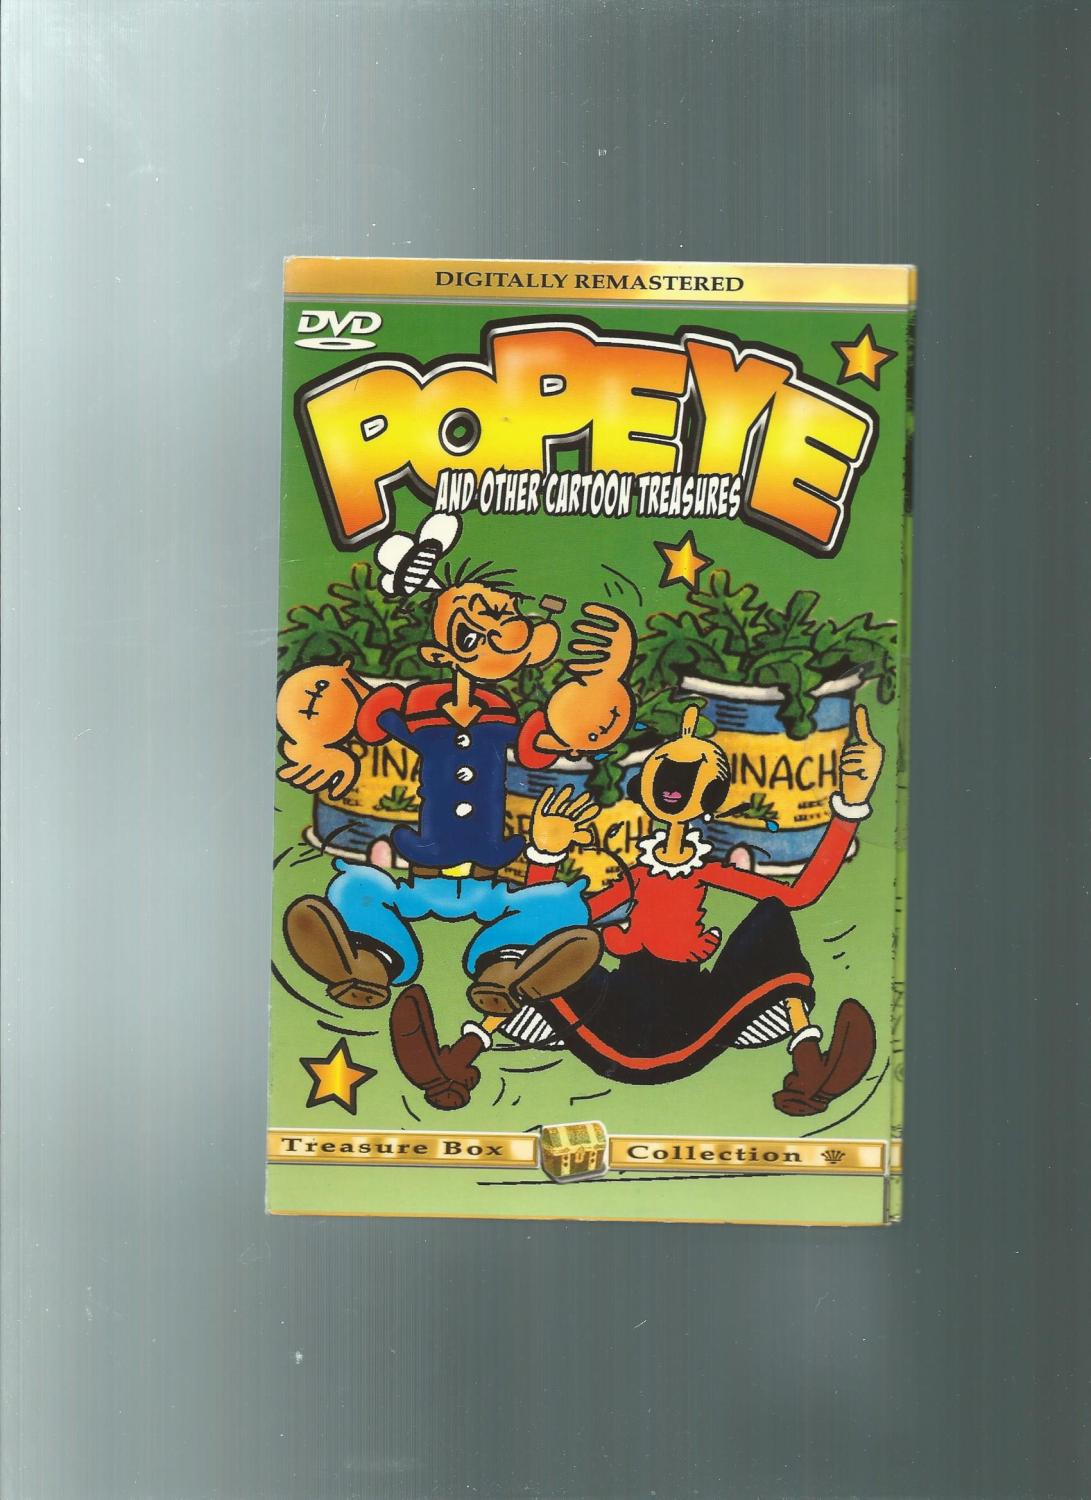 POPEYE and other cartoon treasures DVD